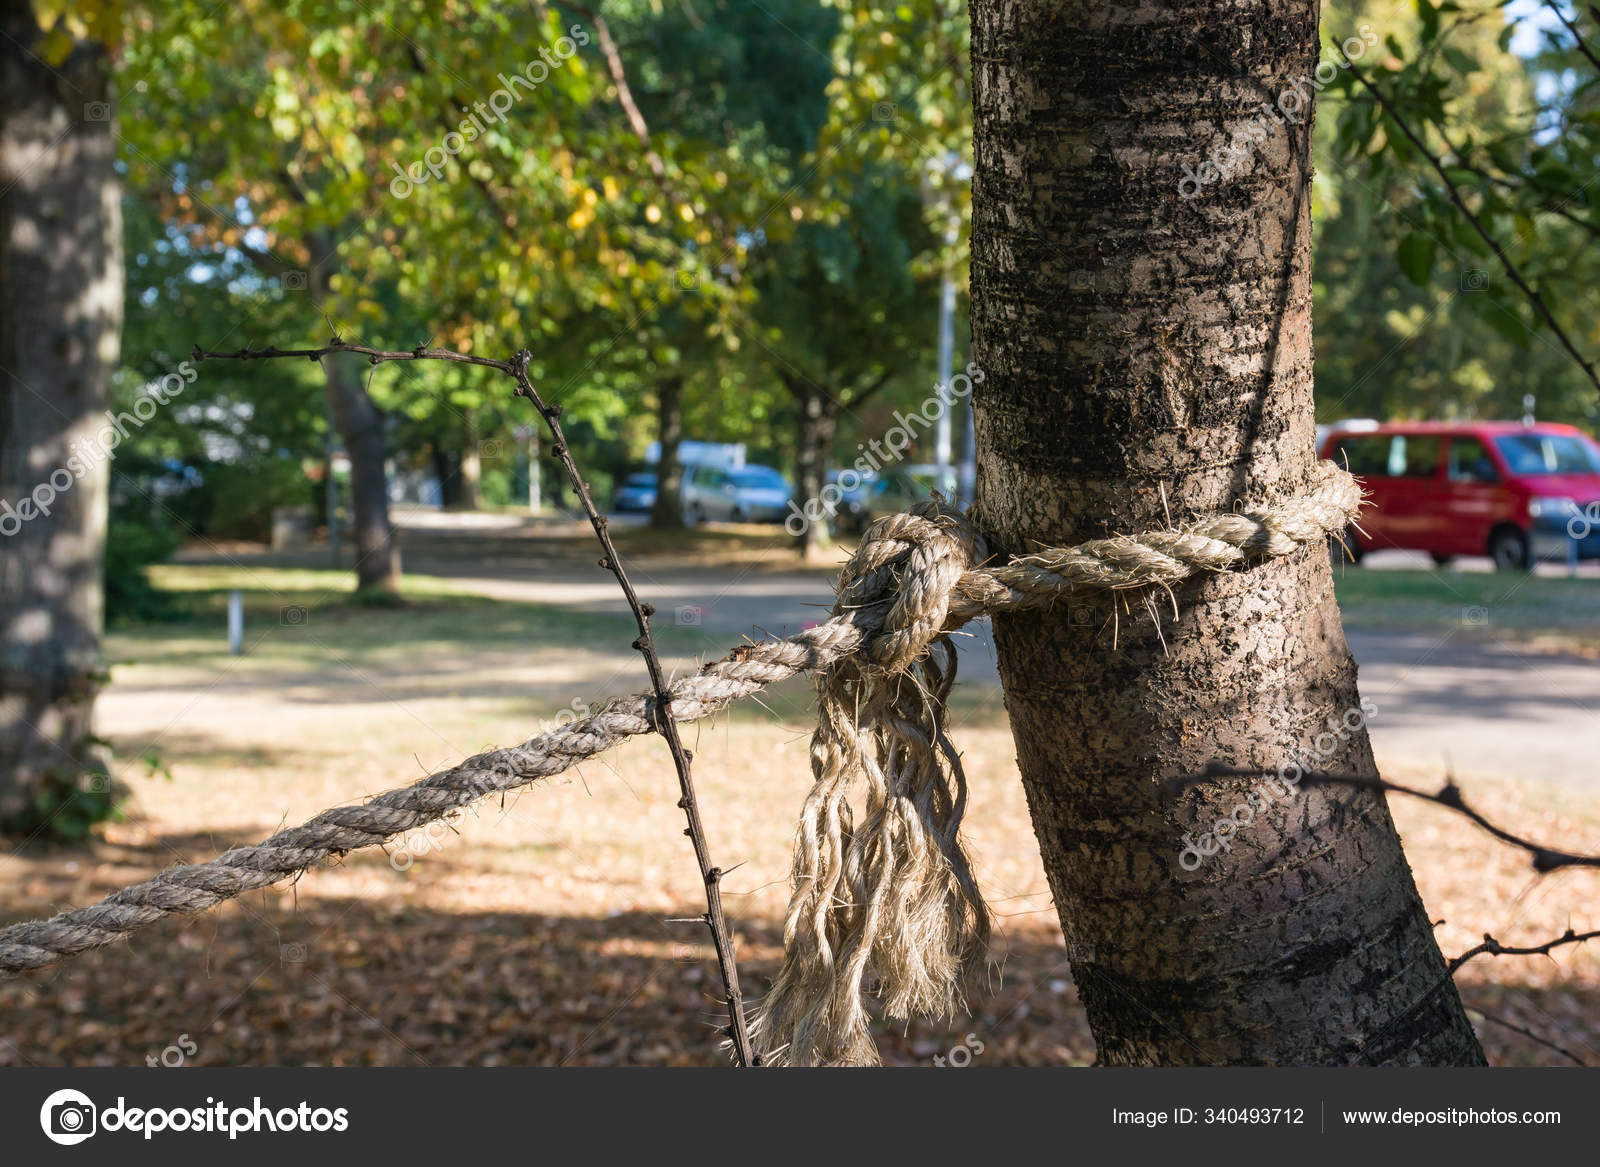 Rope Secure Tied Tree Trunk Strength Outdoors Morning — Stock Photo ©  PantherMediaSeller #340493712